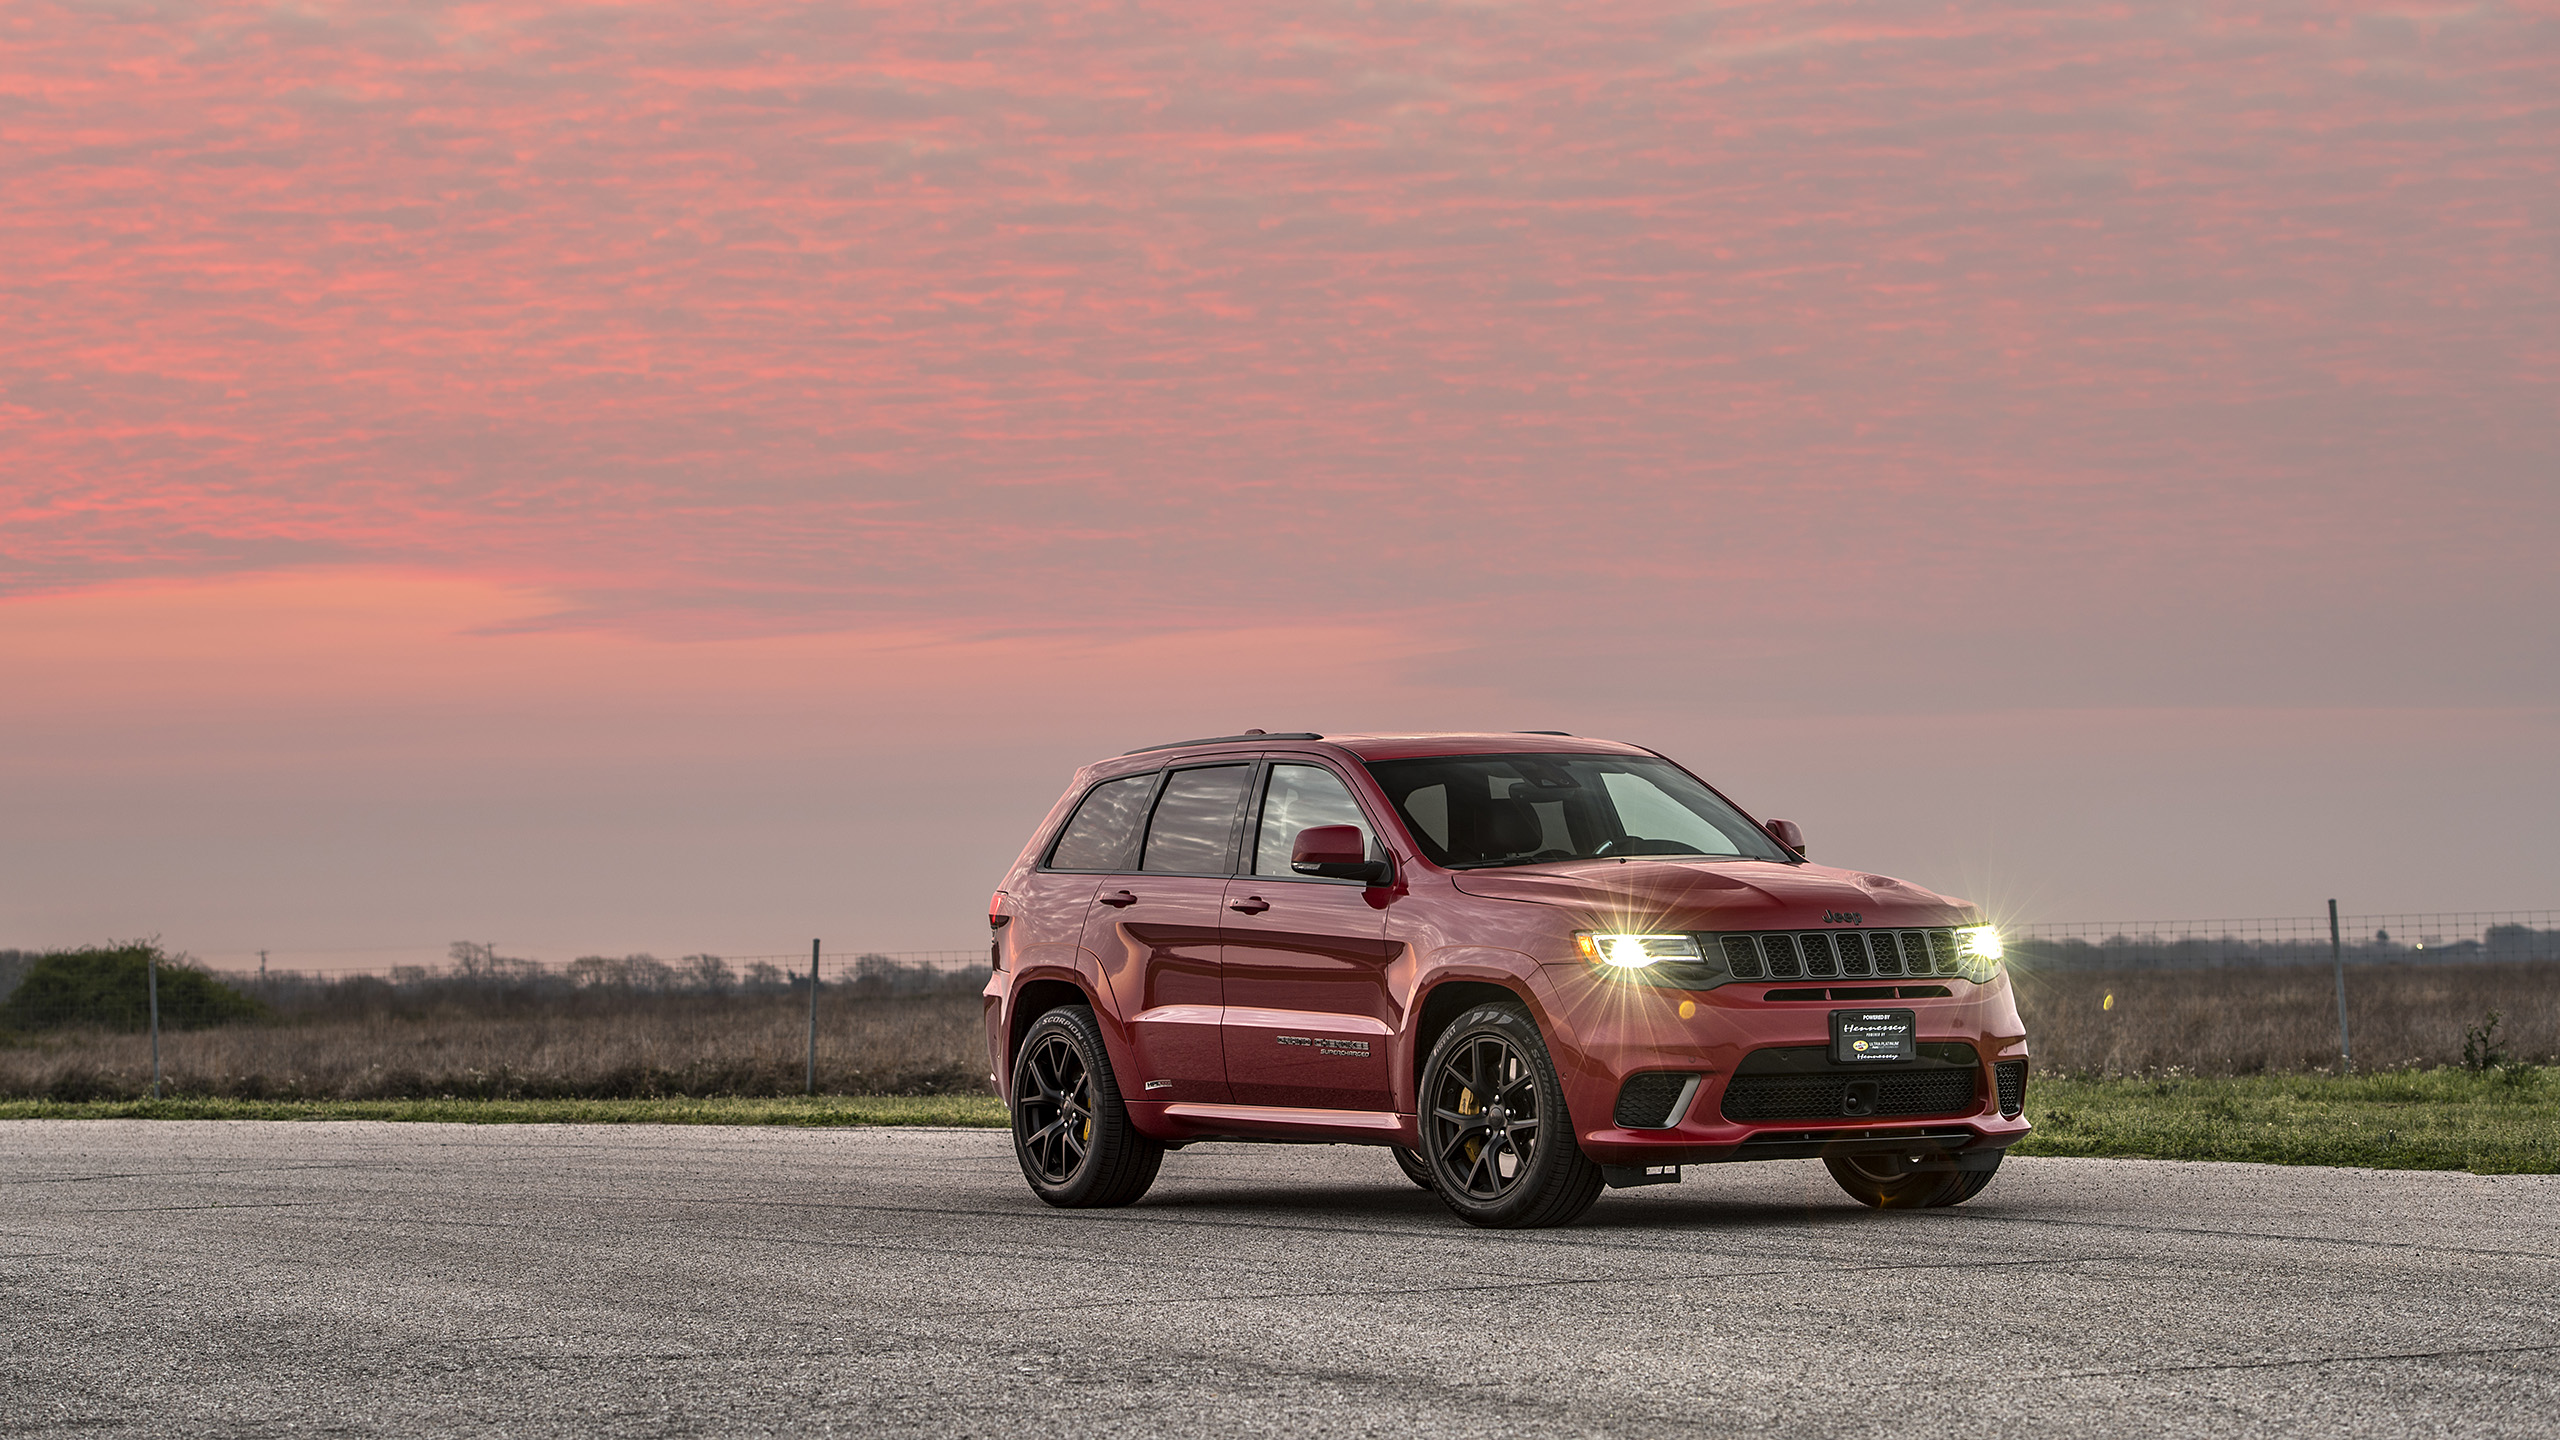 Vehicles Jeep Grand Cherokee HD Wallpaper | Background Image